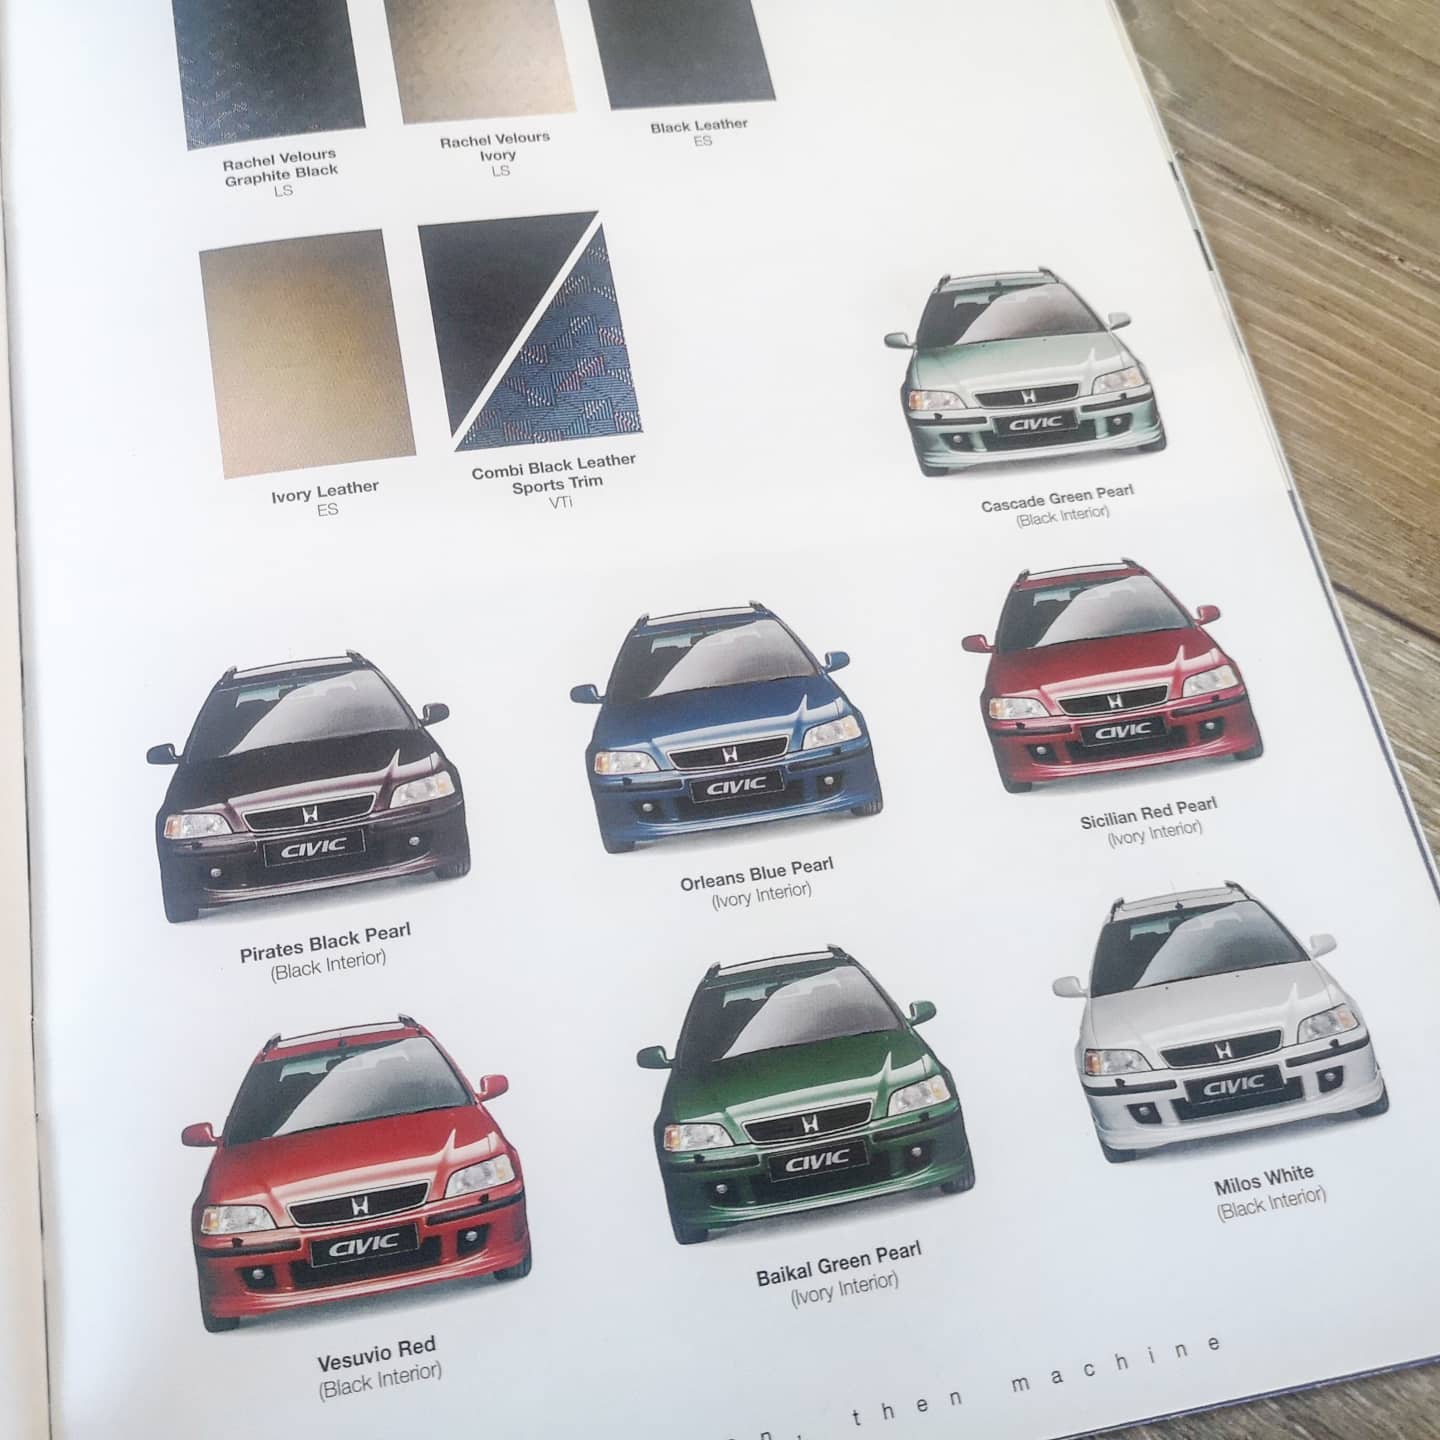 8,000rpm, 94bhp/litre, N/A, LSD equipped estate. - Page 2 - Readers' Cars - PistonHeads